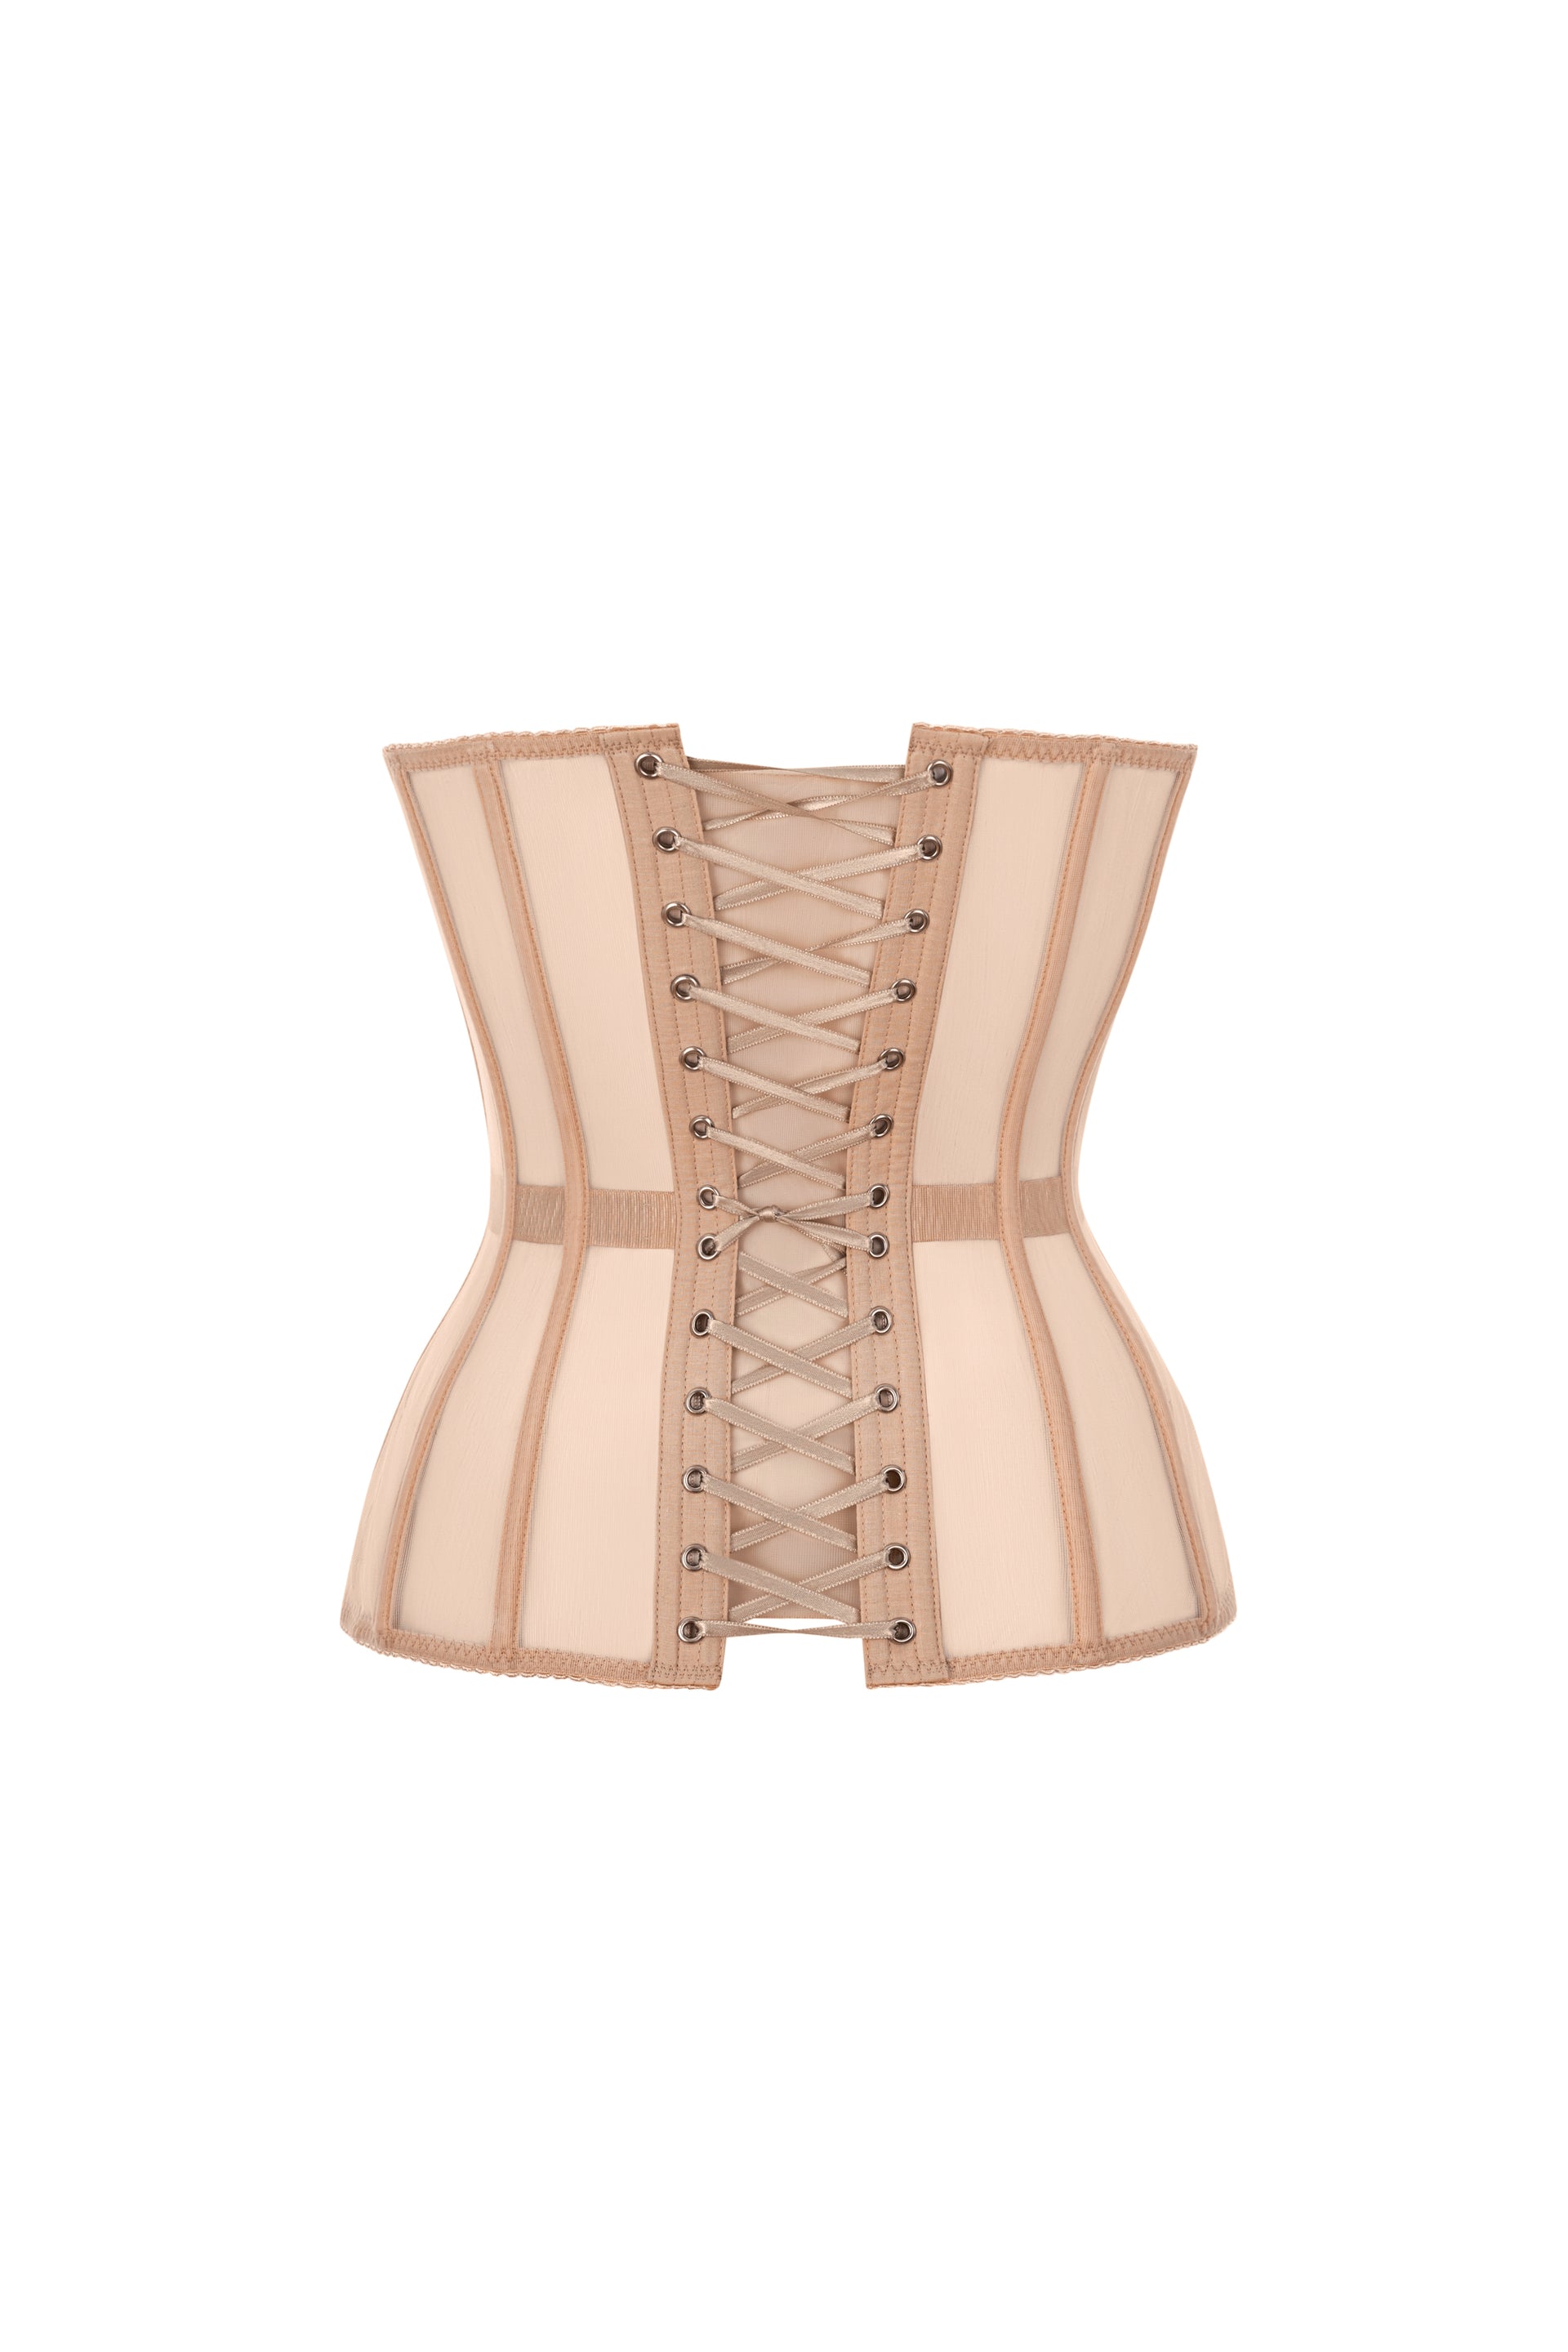 Beige corset without cups